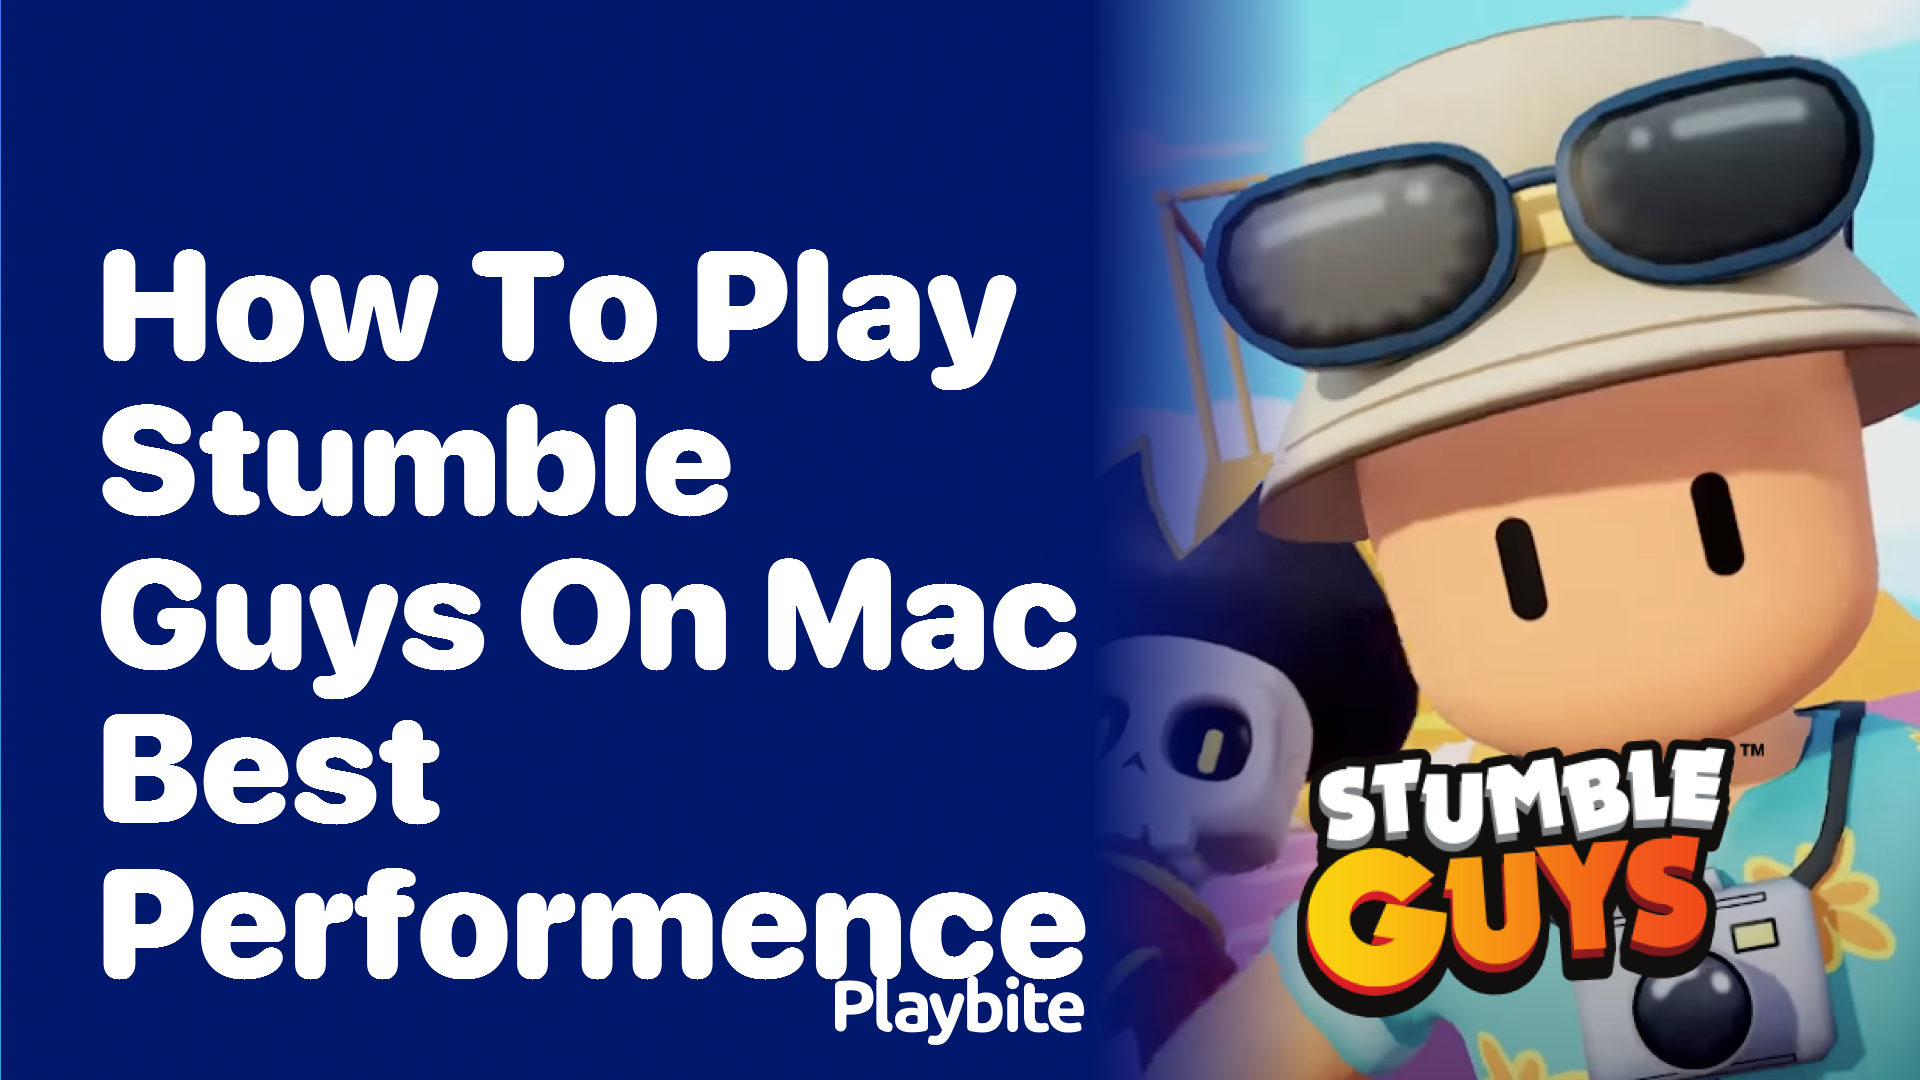 How to Play Stumble Guys on Mac for the Best Performance